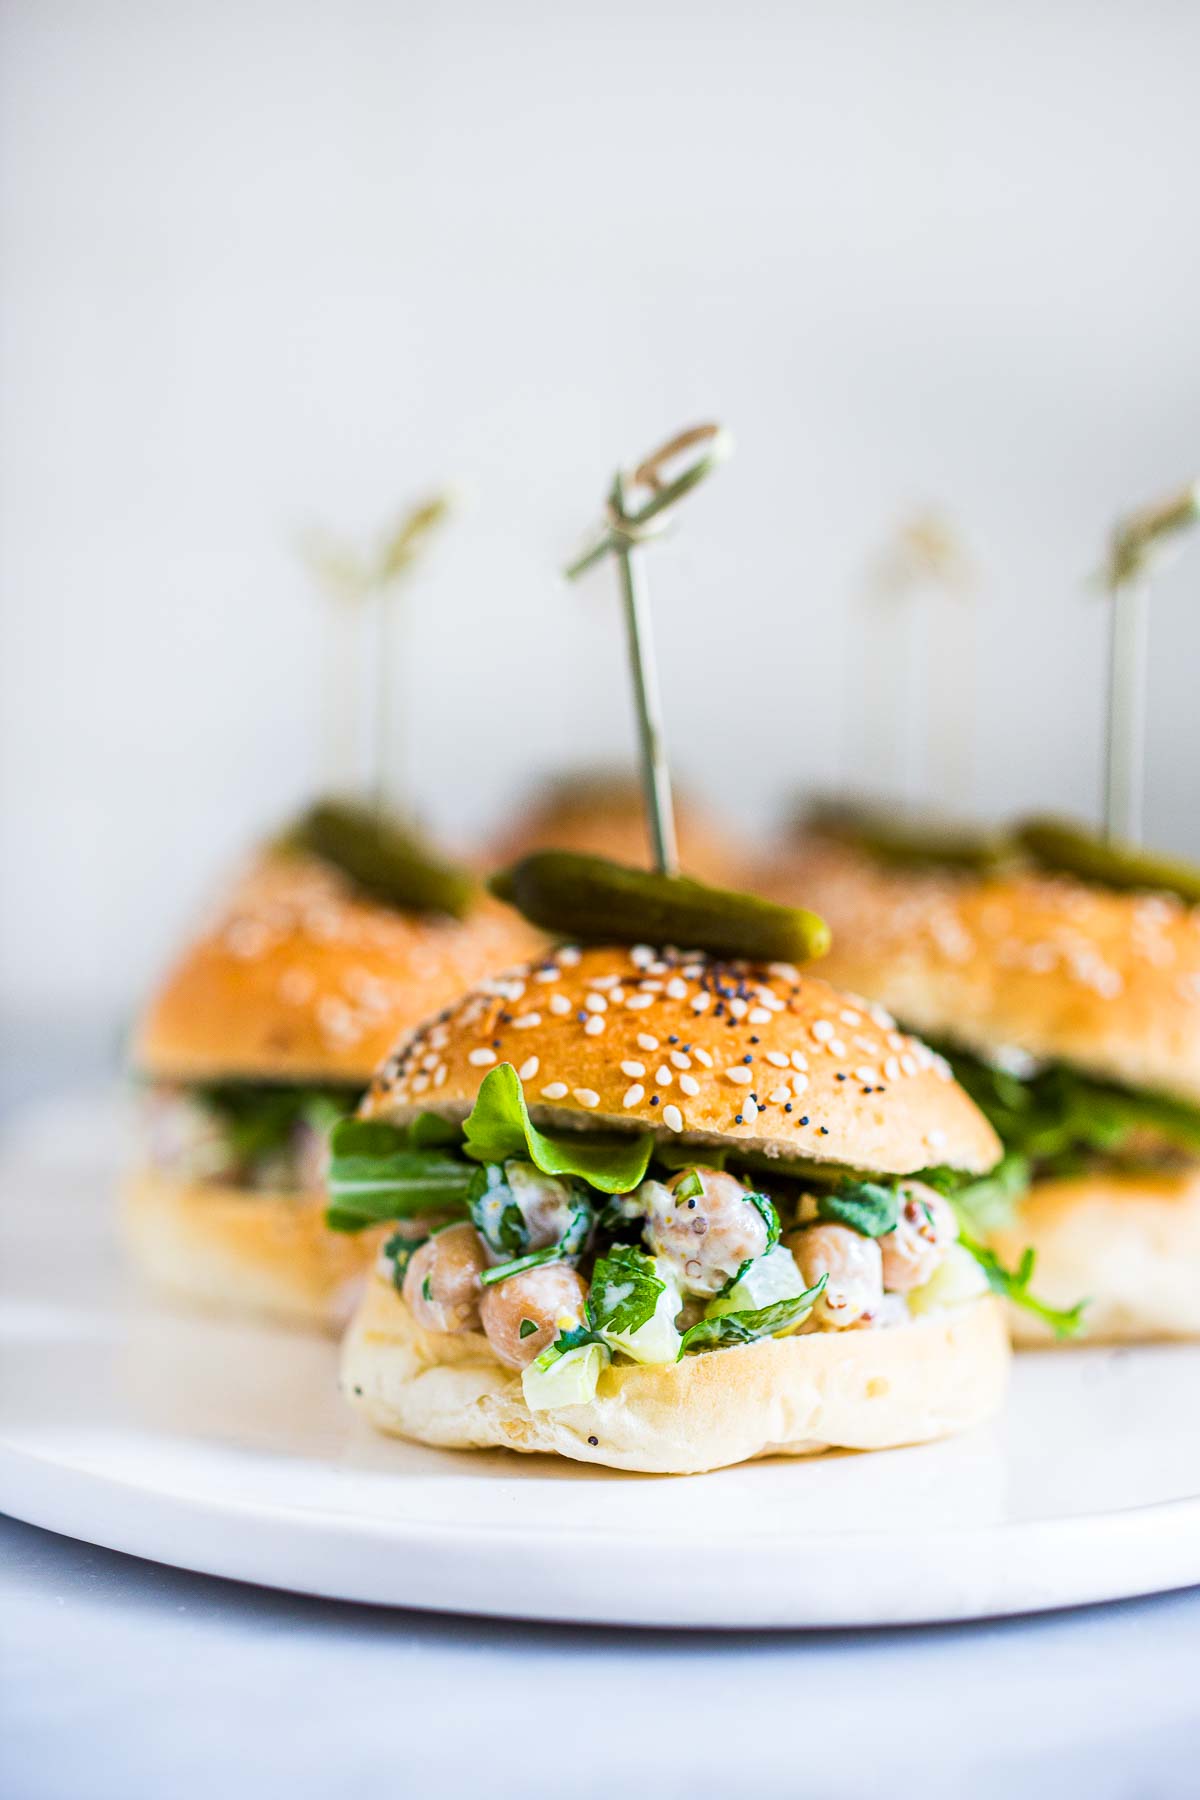 chickpea salad sandwich on slider bun, topped with cornichon on skewer.